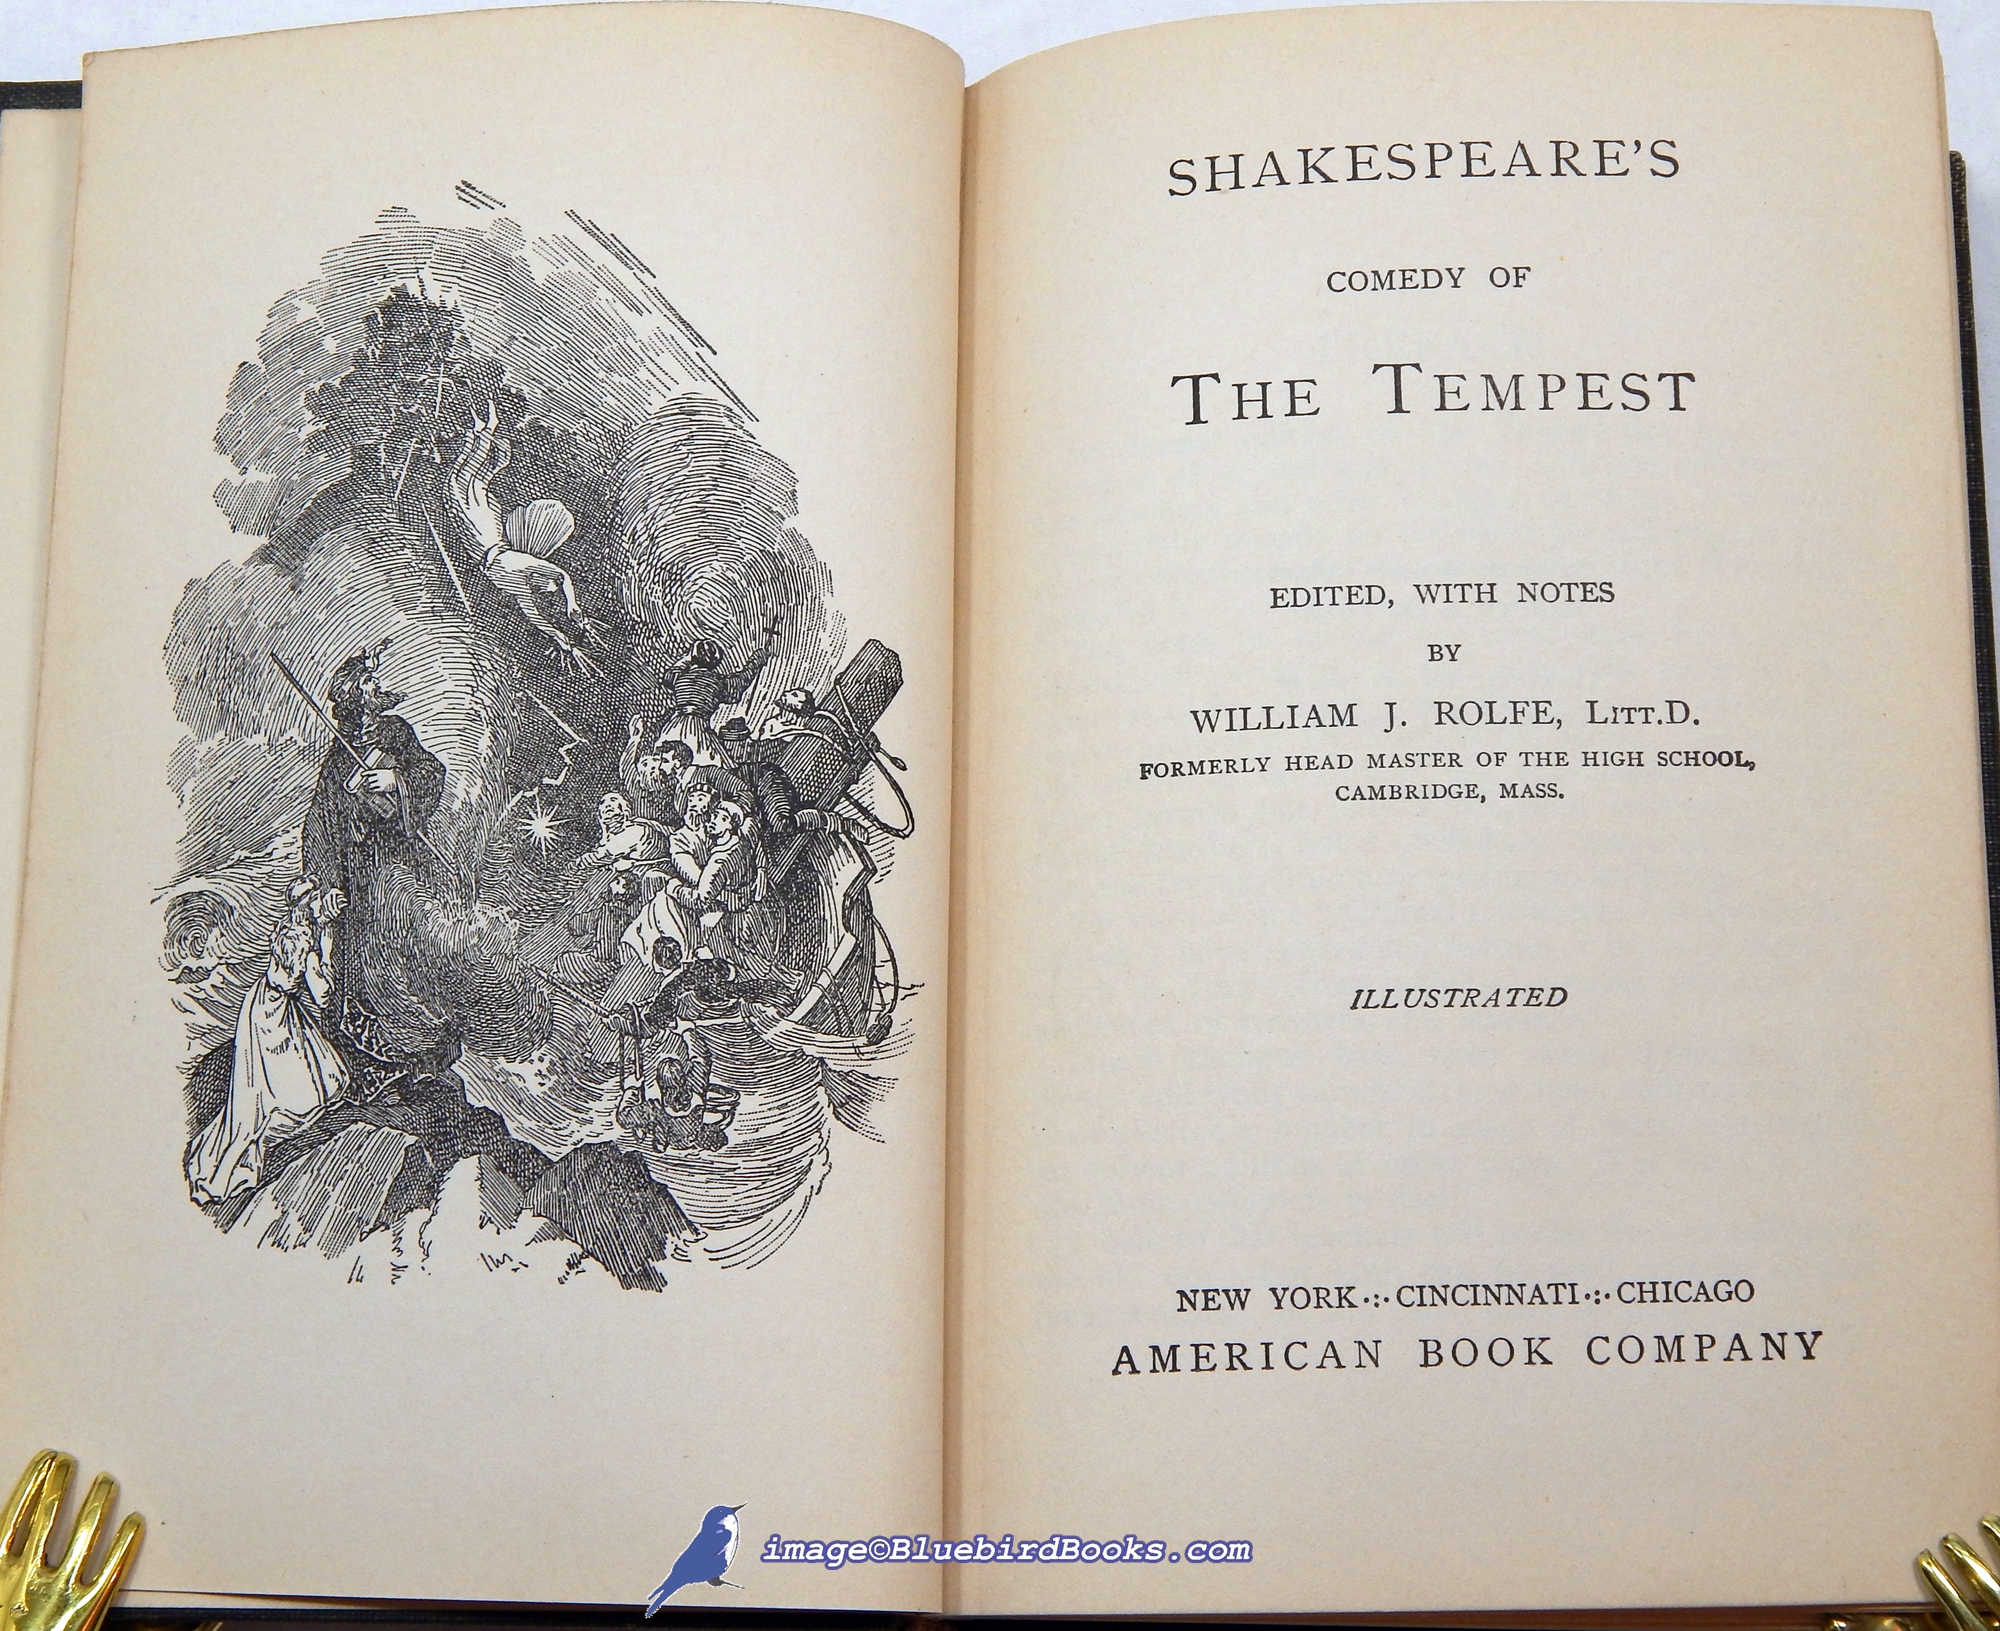 SHAKESPEARE, WILLIAM - Shakespeare's Comedy of the Tempest